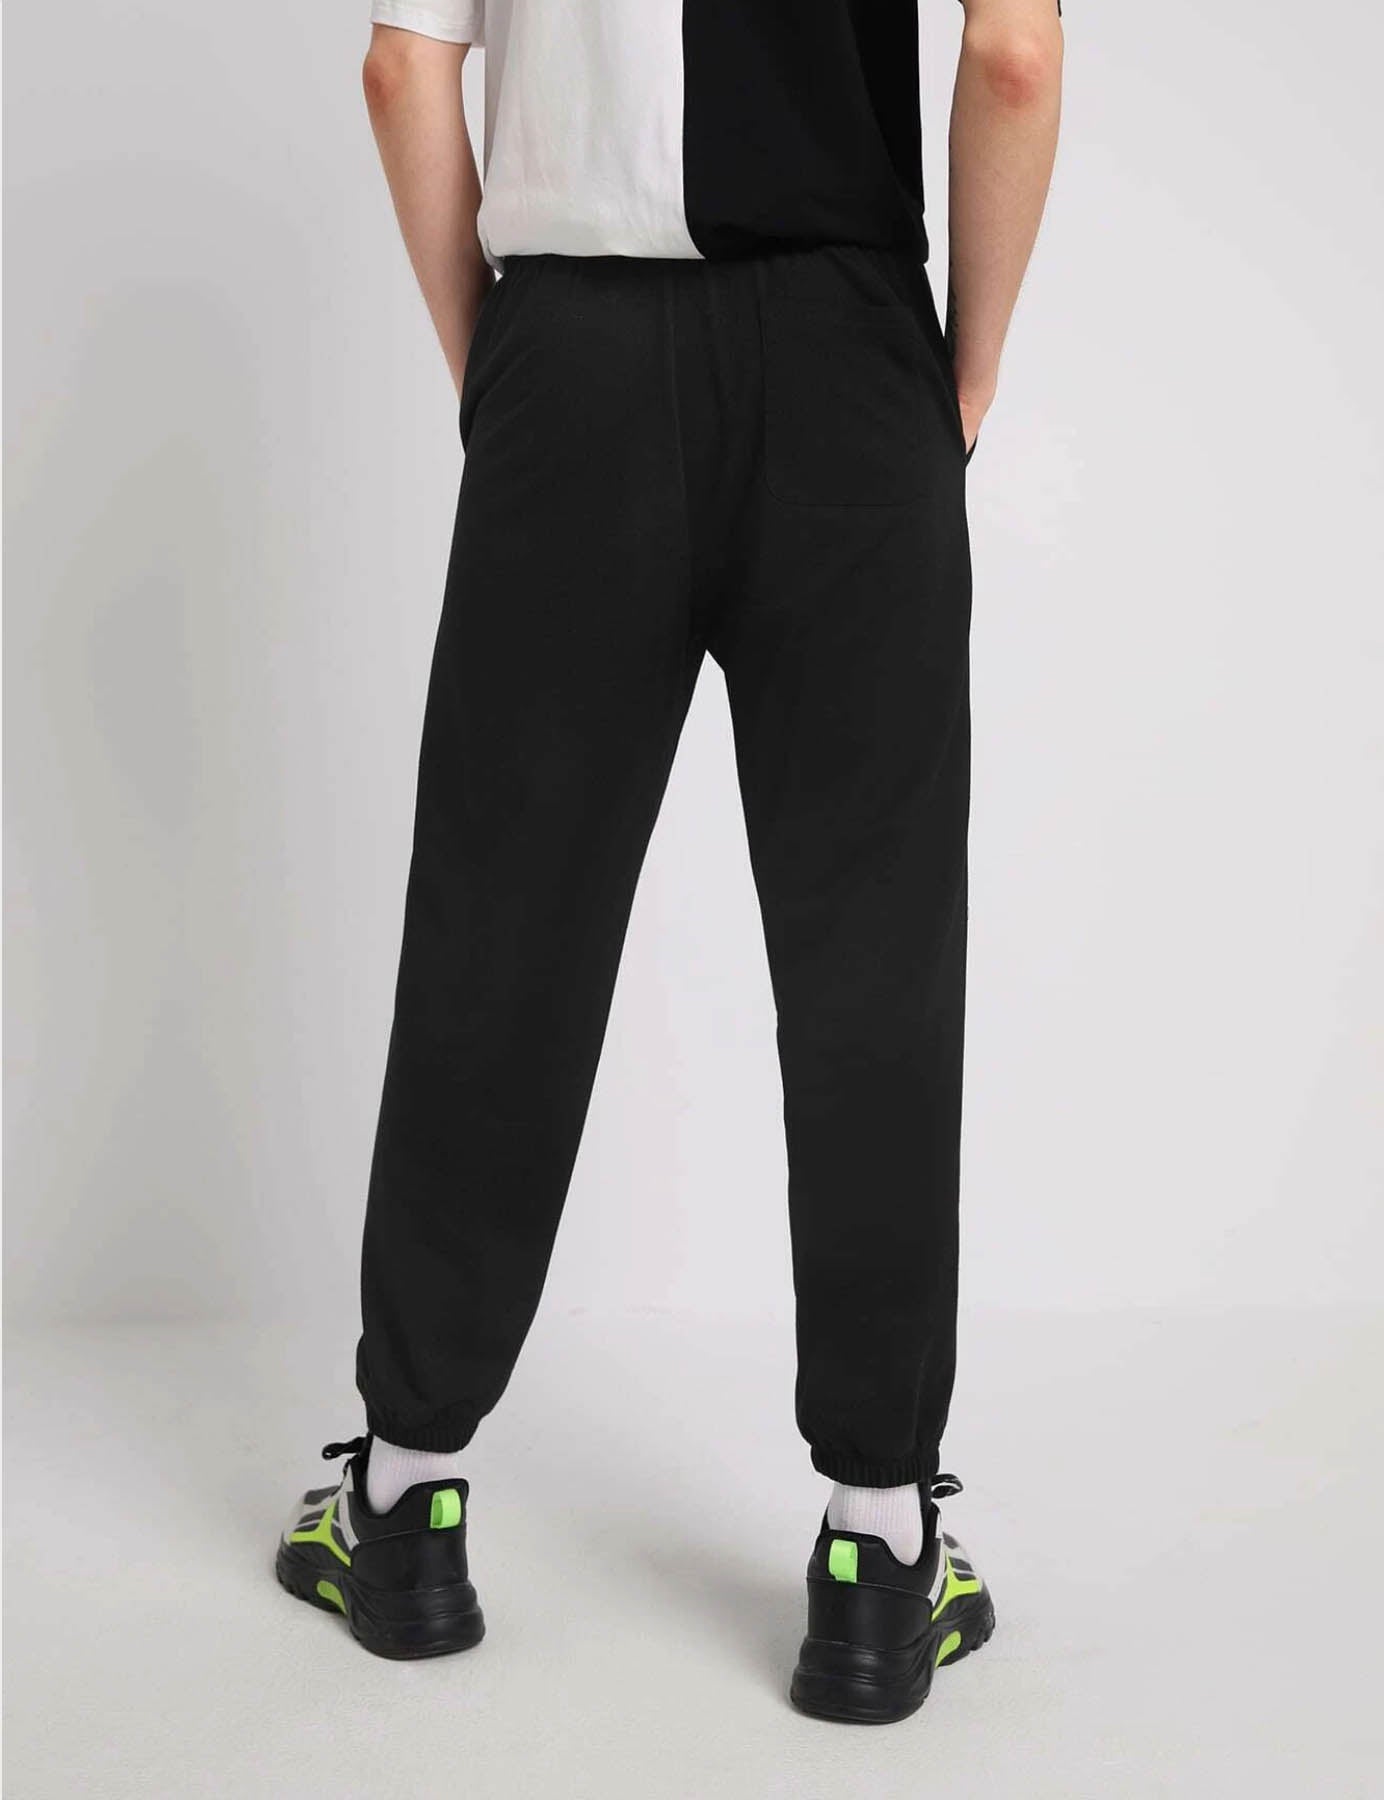 black graphic printed joggers for men